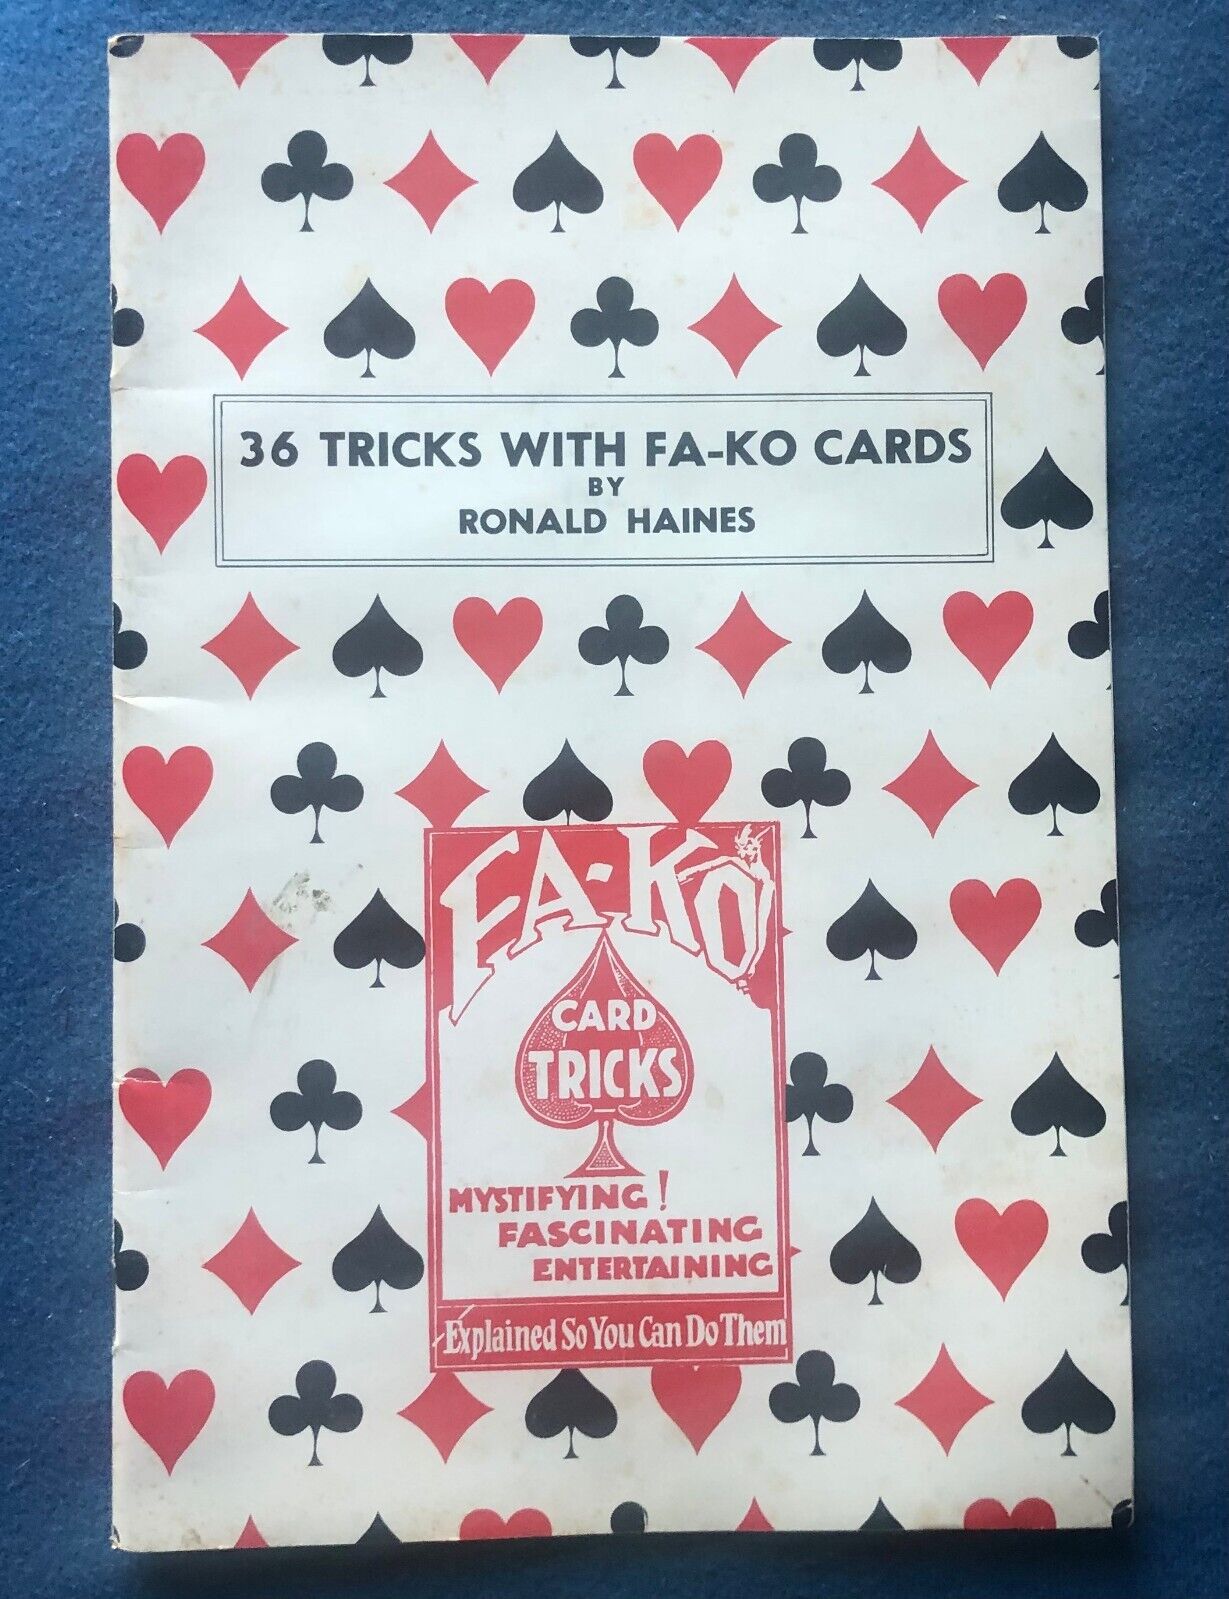 Magic Trick Booklet 36 Tricks With Fa-Ko Cards Ronald Haines House Of Cards 1960